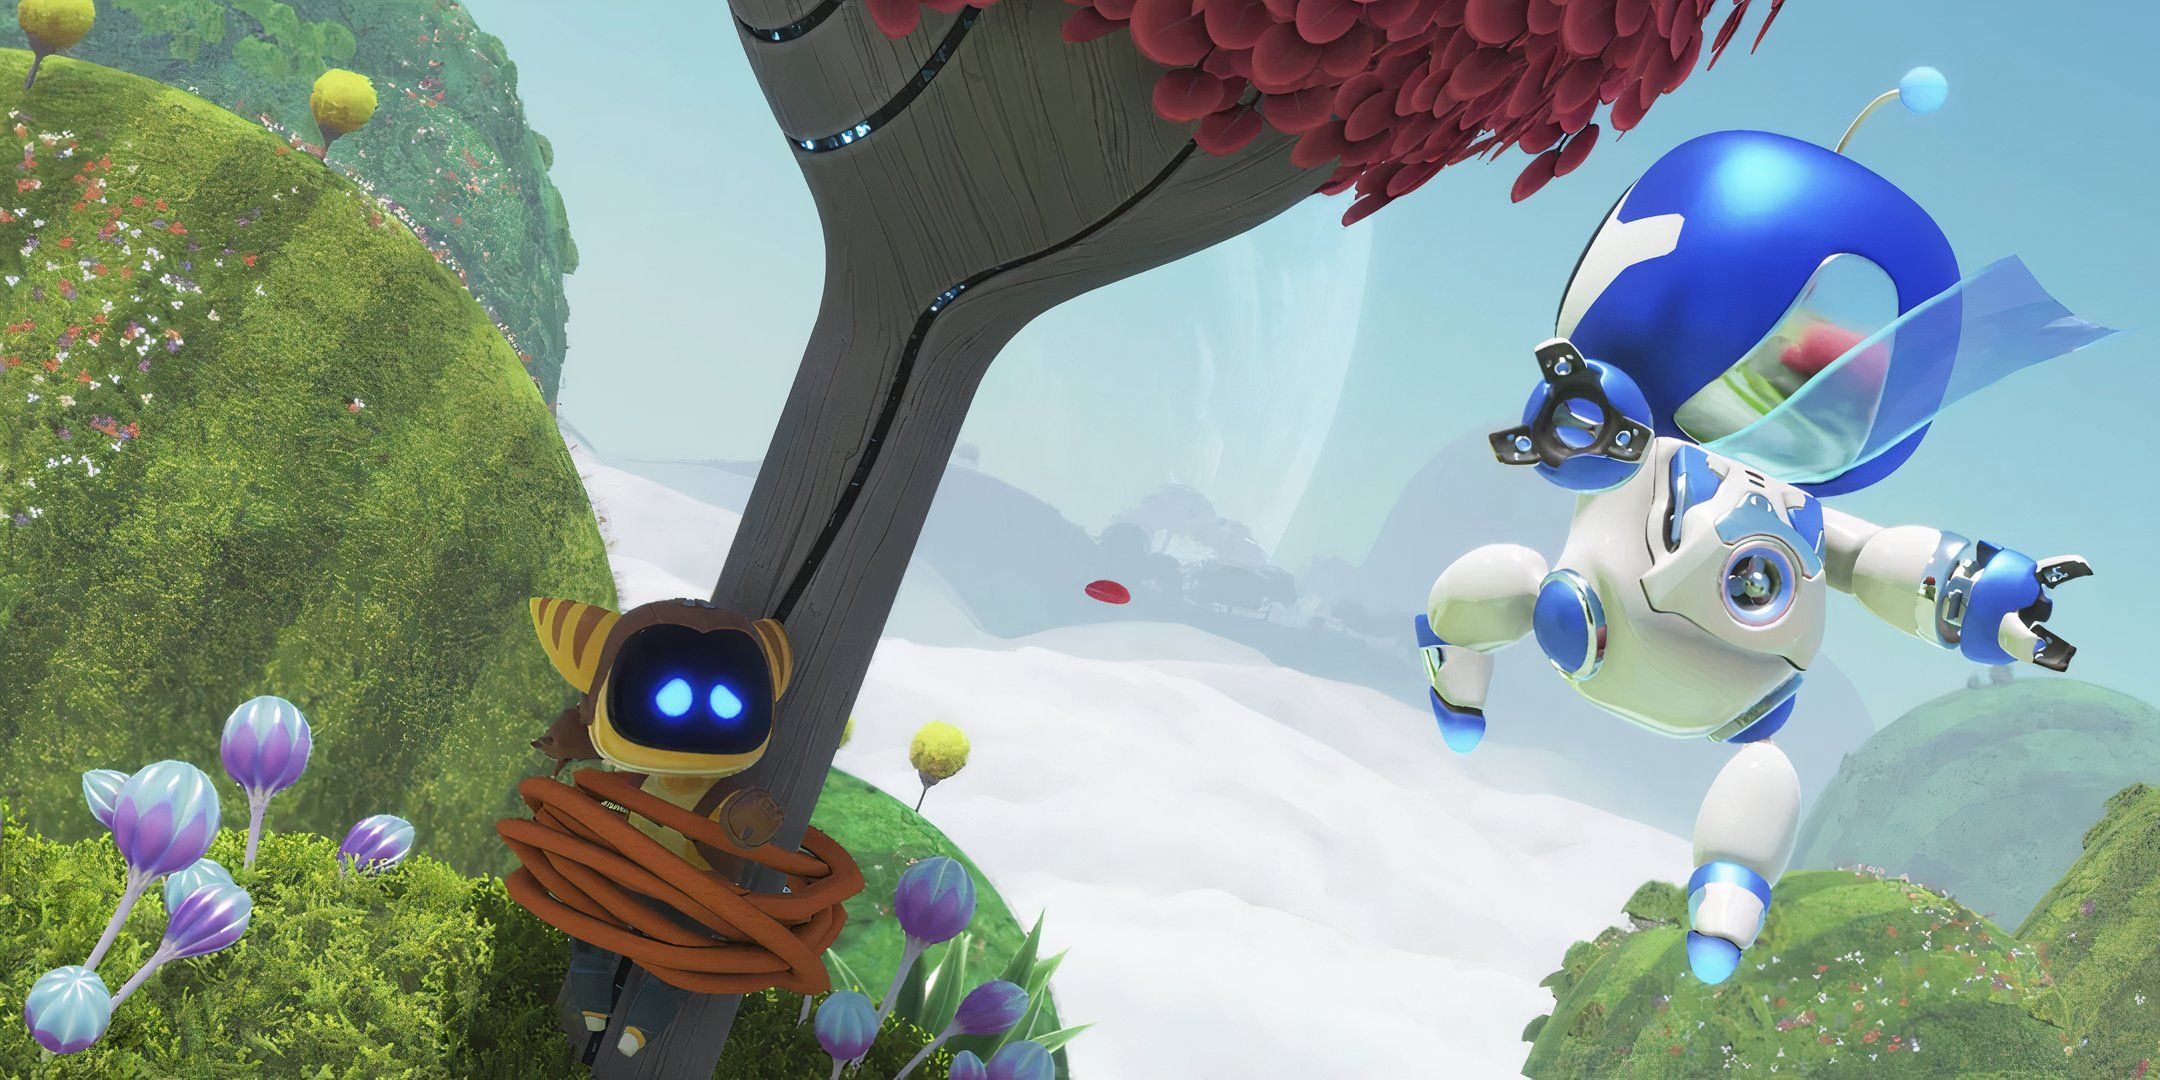 Astro Bot Employs Different PlayStation Mascots Like Deadpool